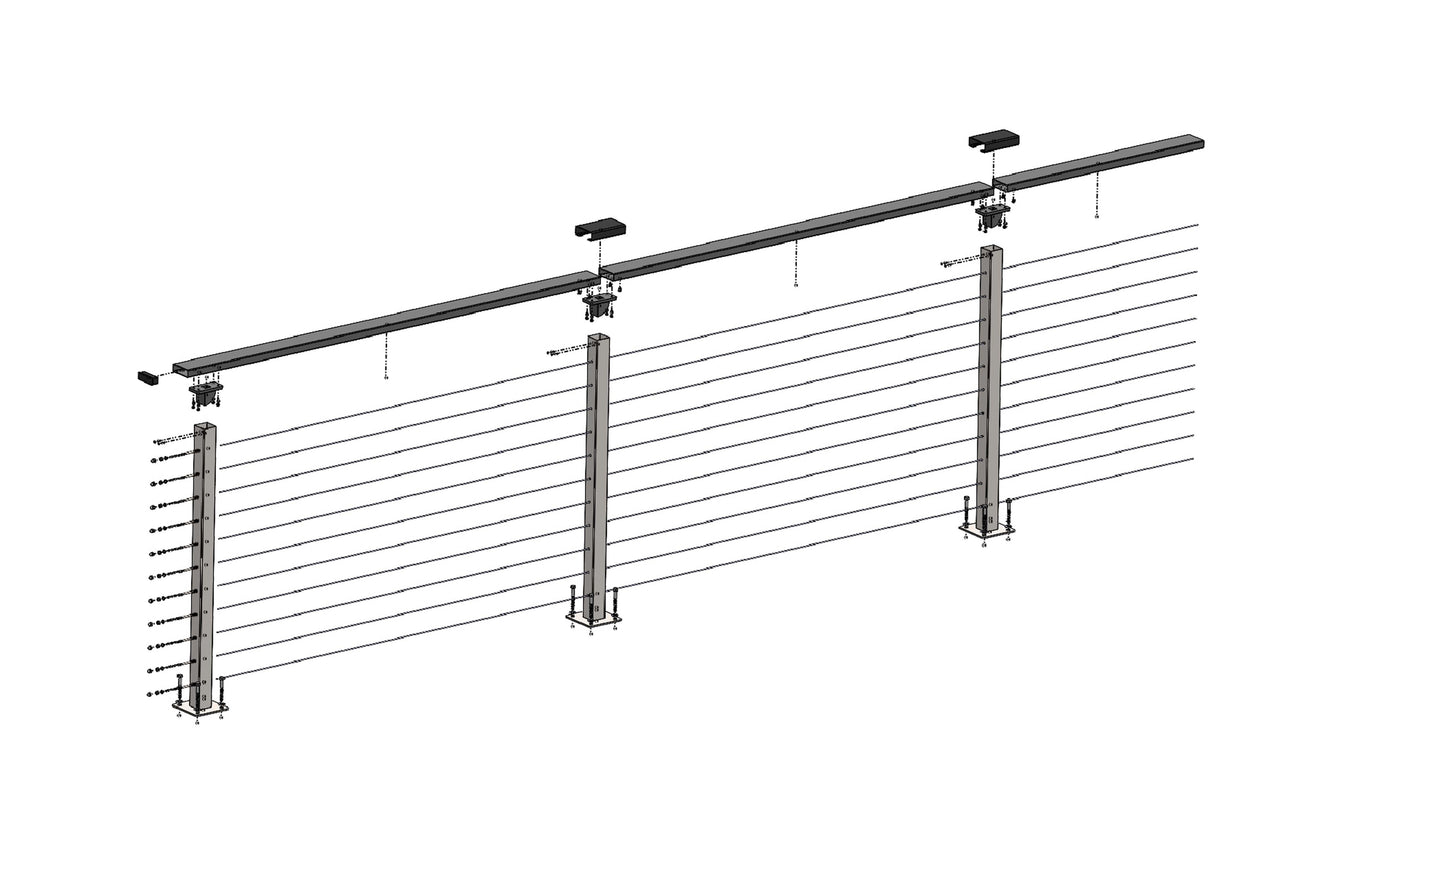 72 ft. x 42 in. White Deck Cable Railing, Base Mount